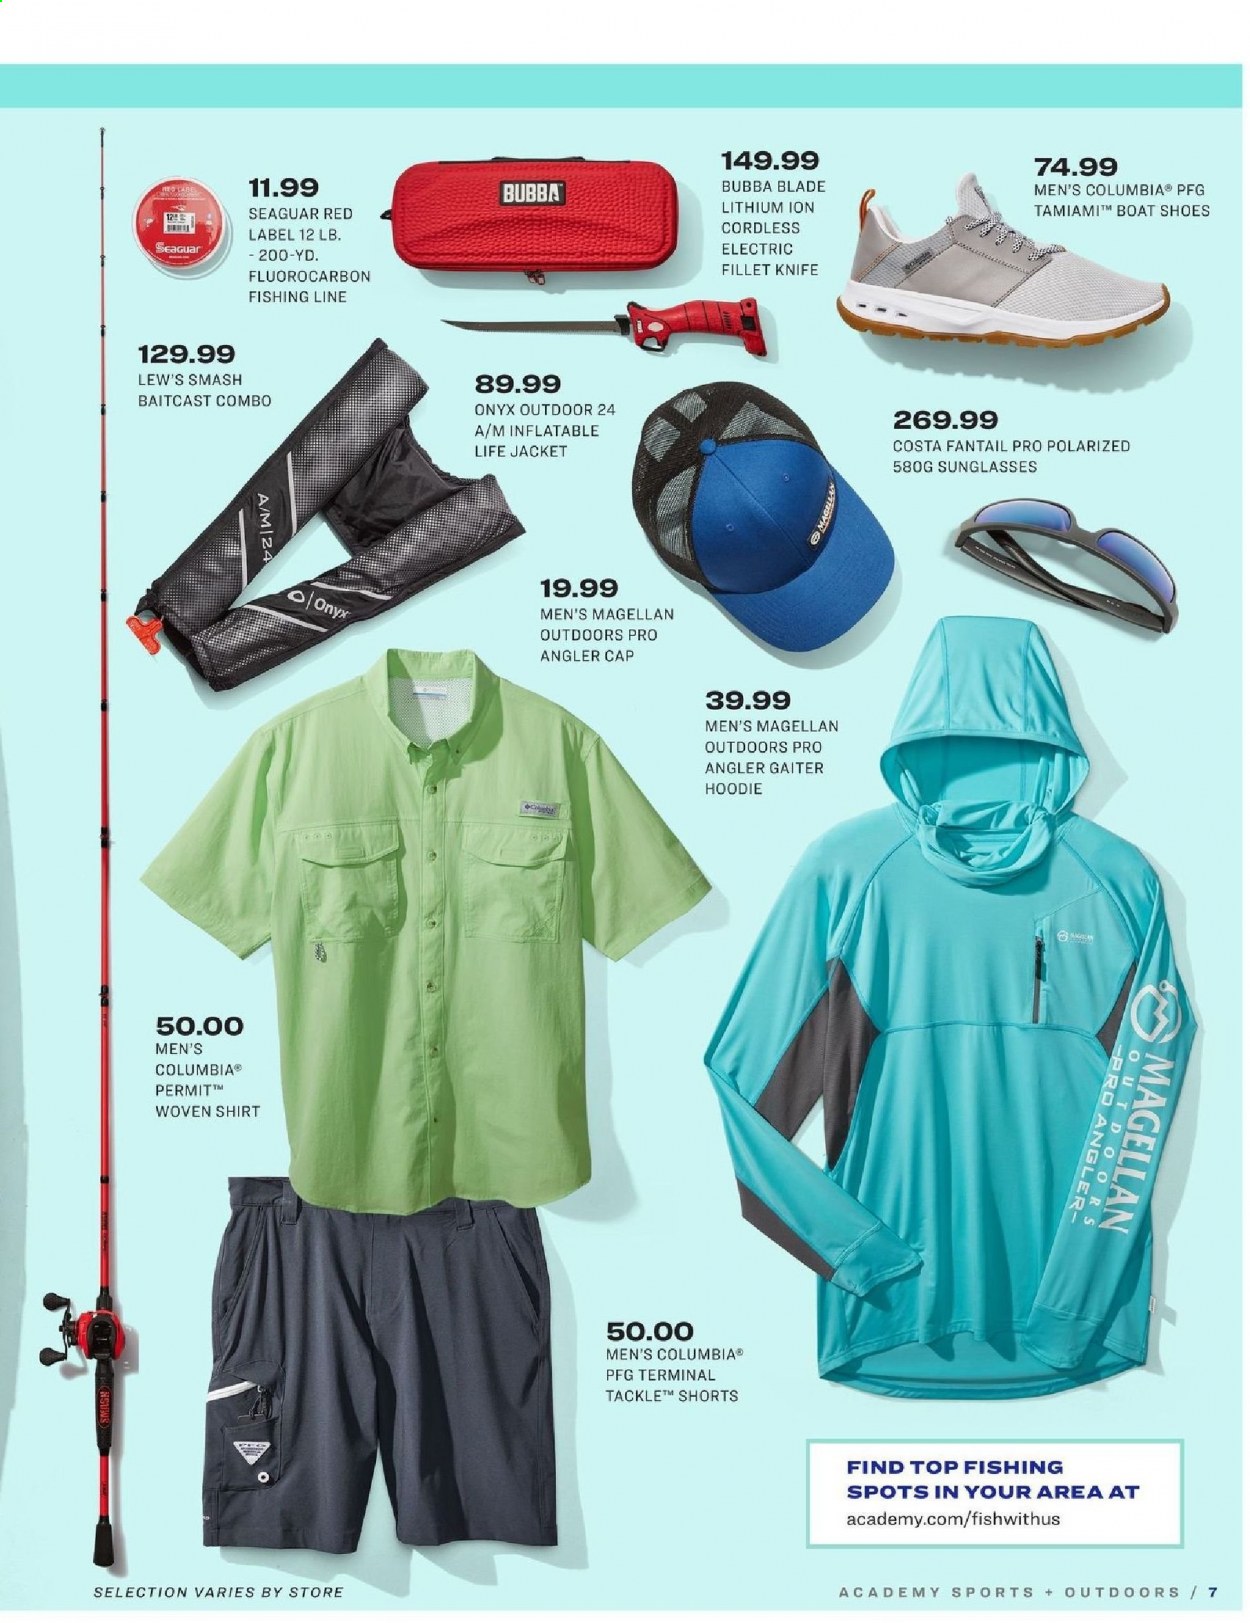 thumbnail - Academy Sports + Outdoors Flyer - 05/31/2021 - 06/20/2021 - Sales products - Columbia, shoes, shorts, shirt, woven shirt, hoodie, sunglasses, baitcast combo, Magellan. Page 7.